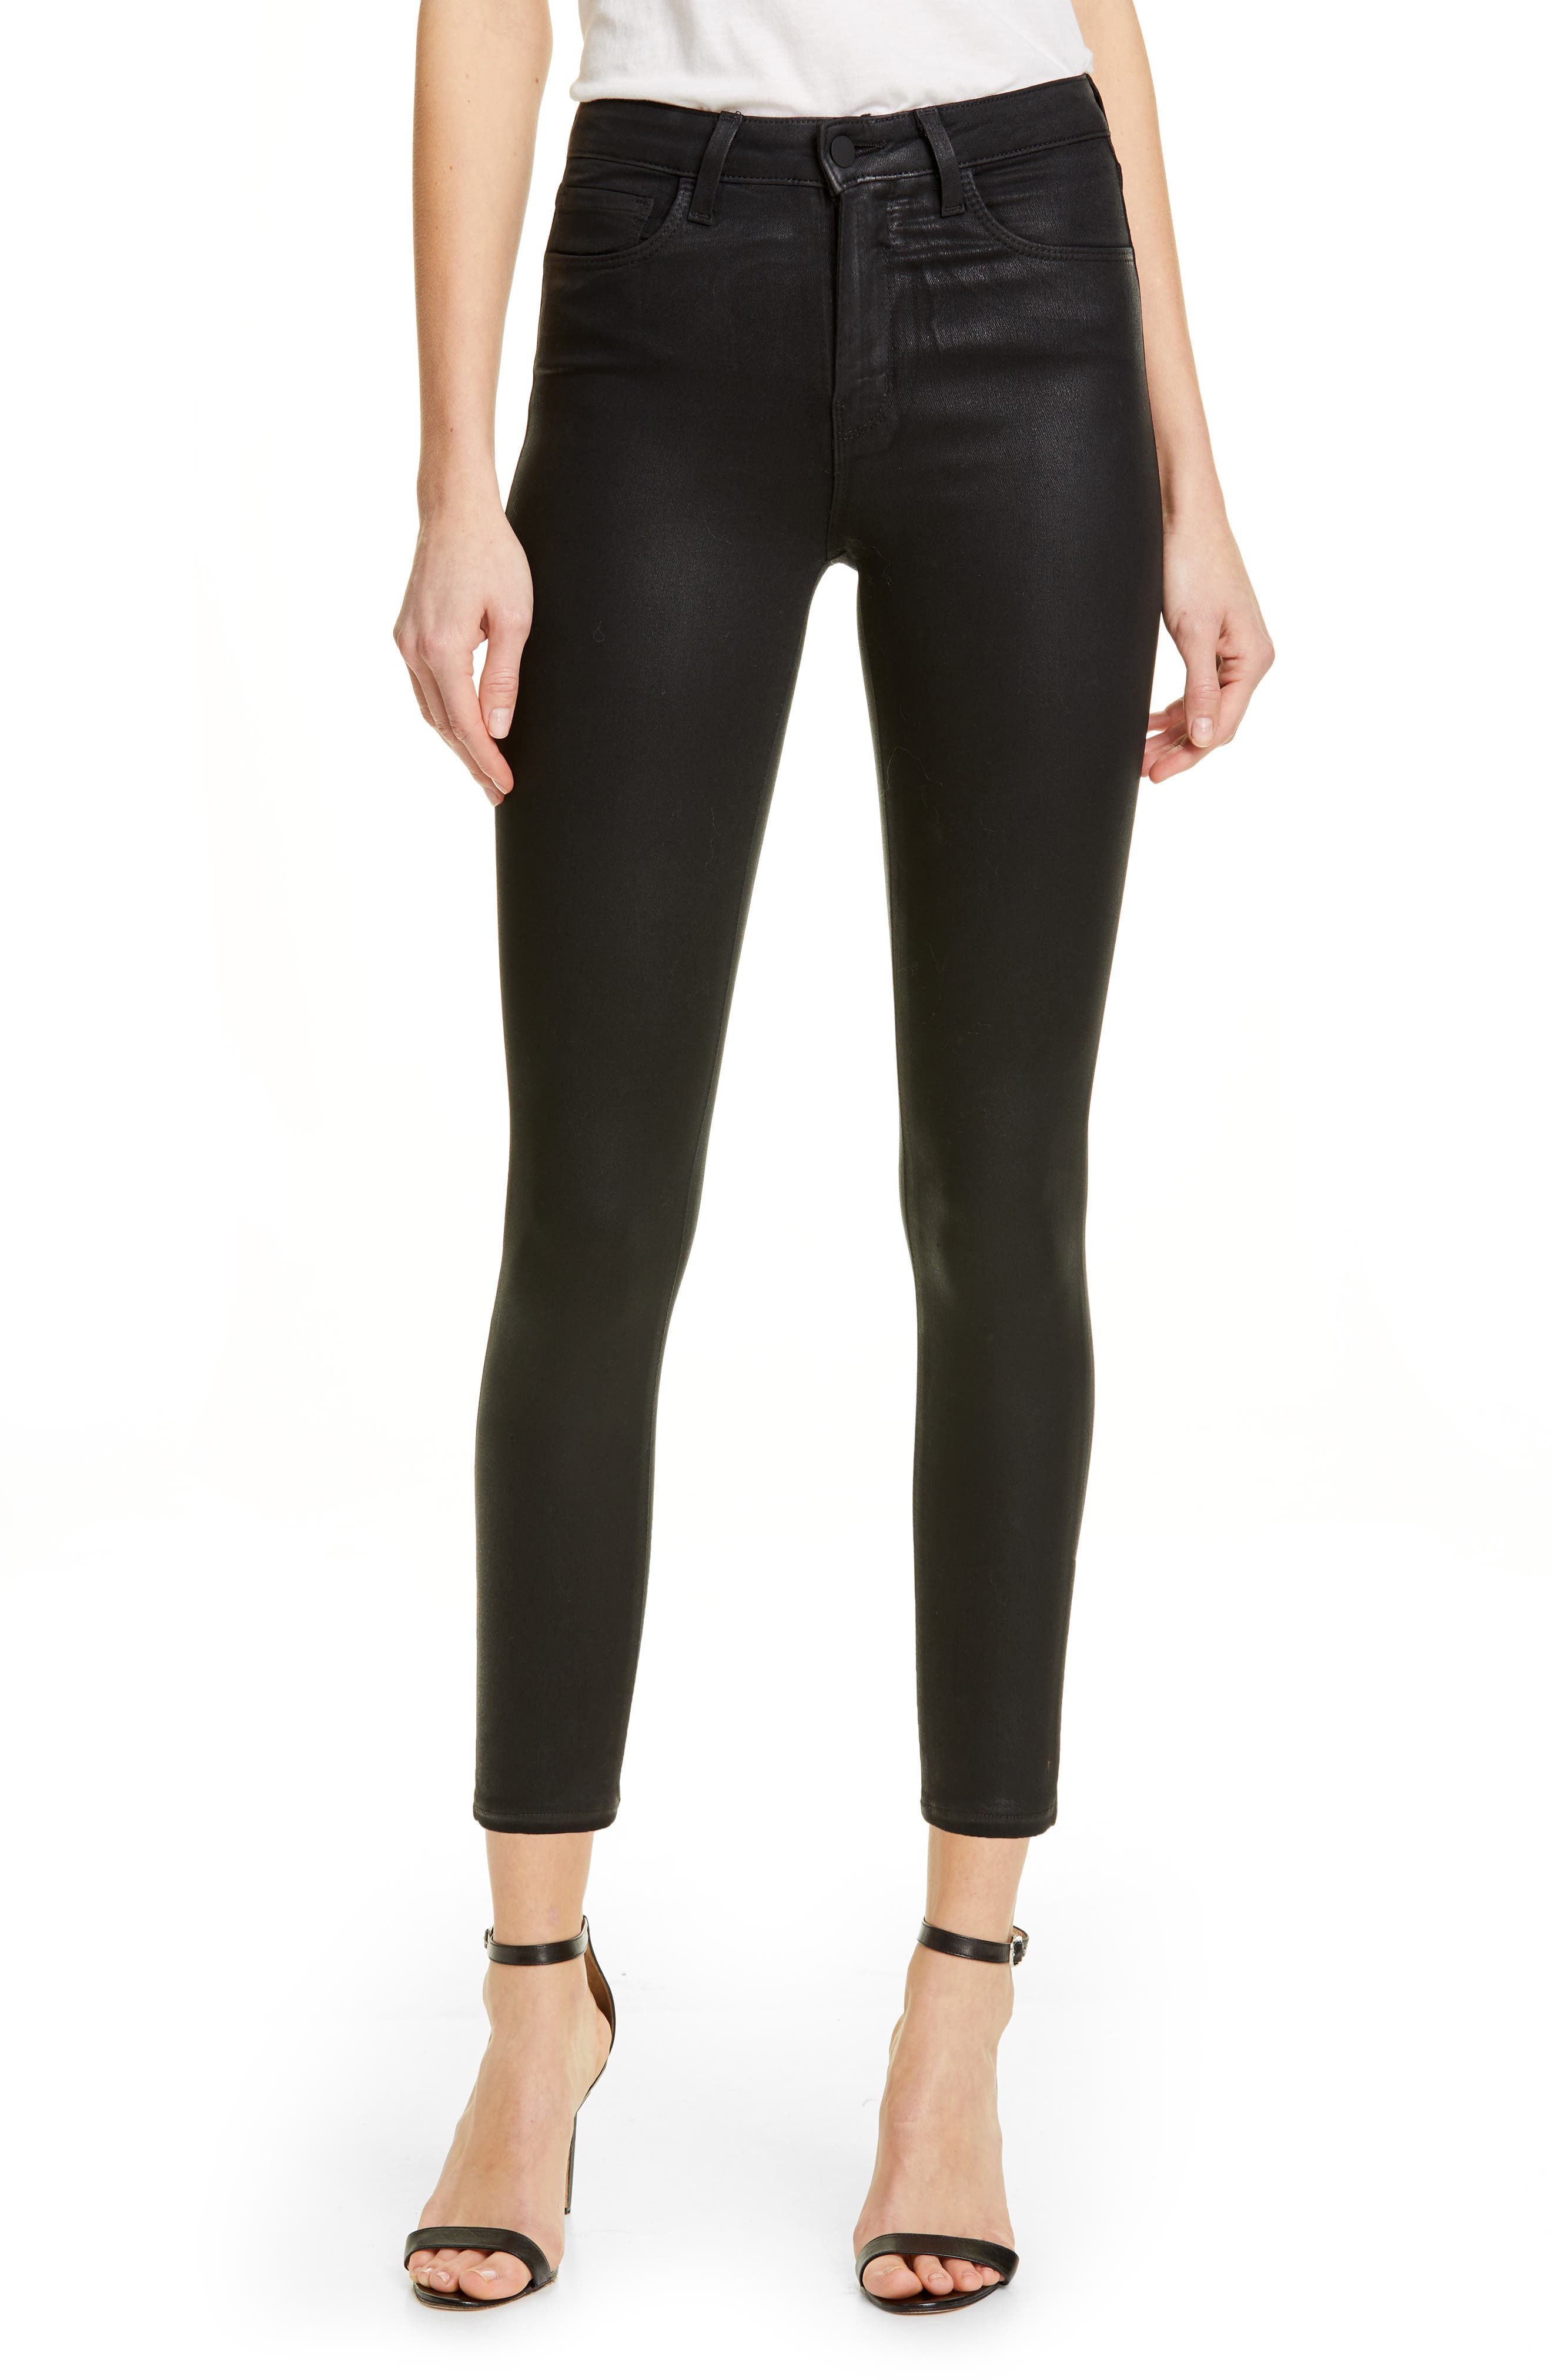 L'AGENCE Coated High Waist Skinny Jeans in Black Coated